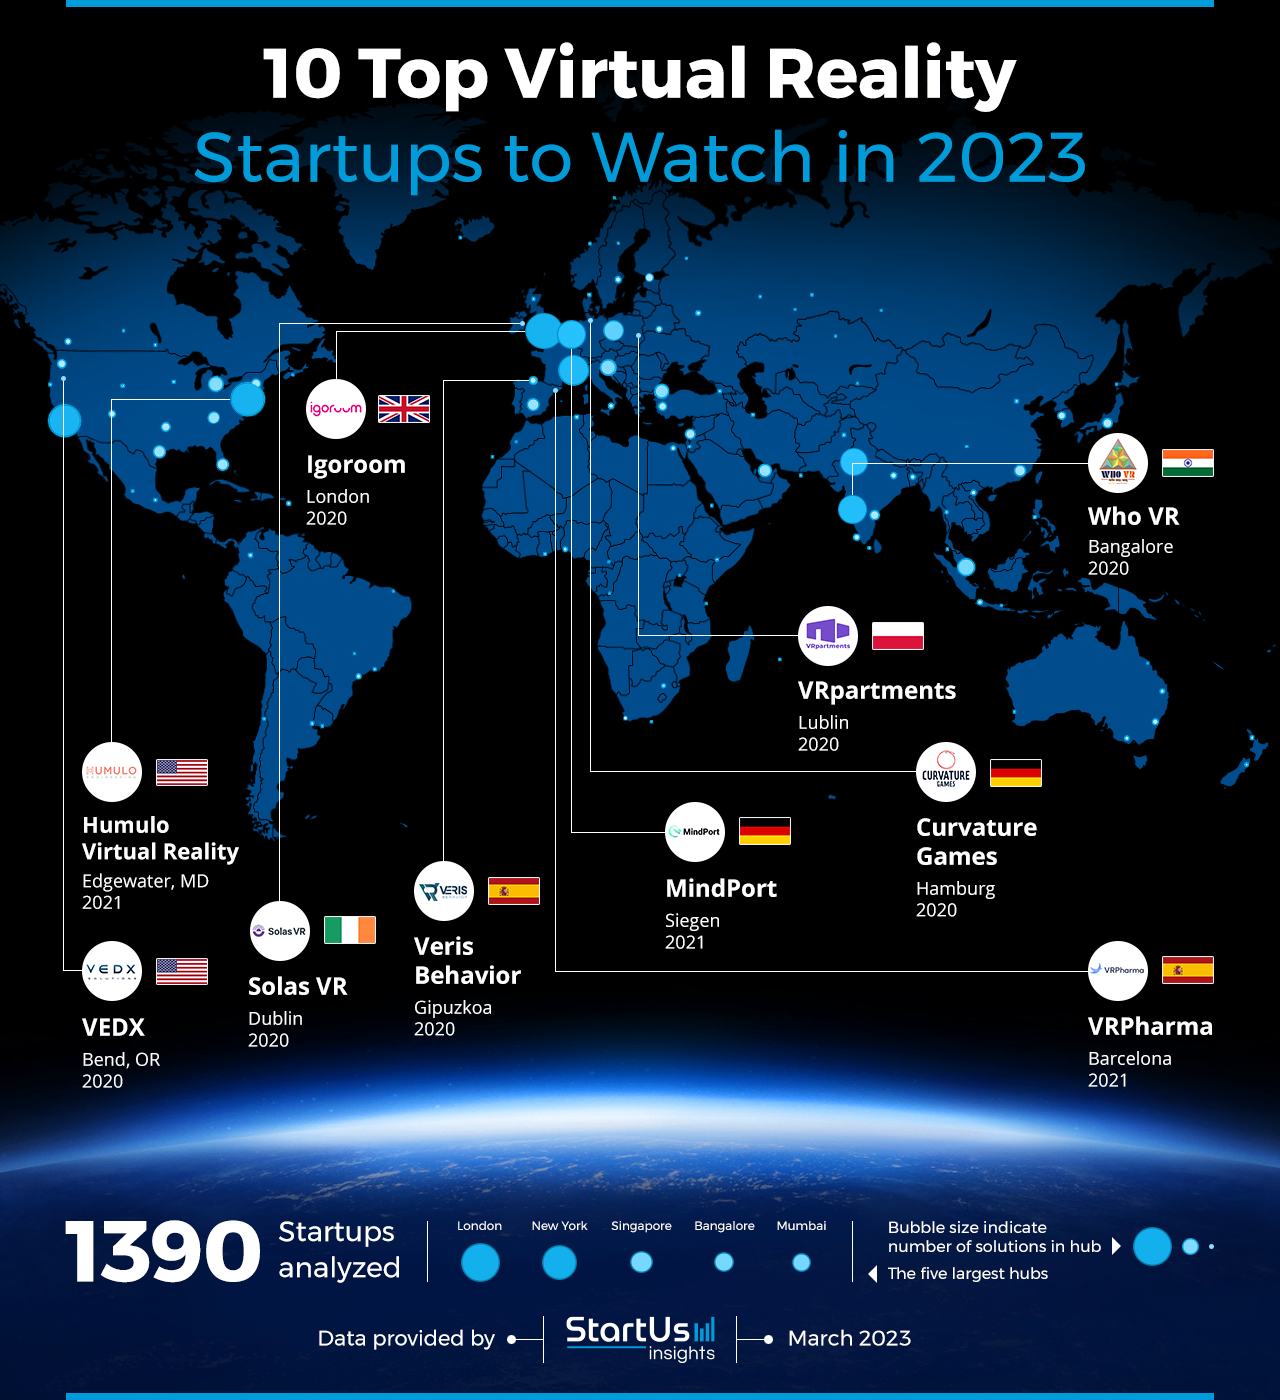 10 Top Virtual Reality Startups to Watch in 2023 | StartUs Insights